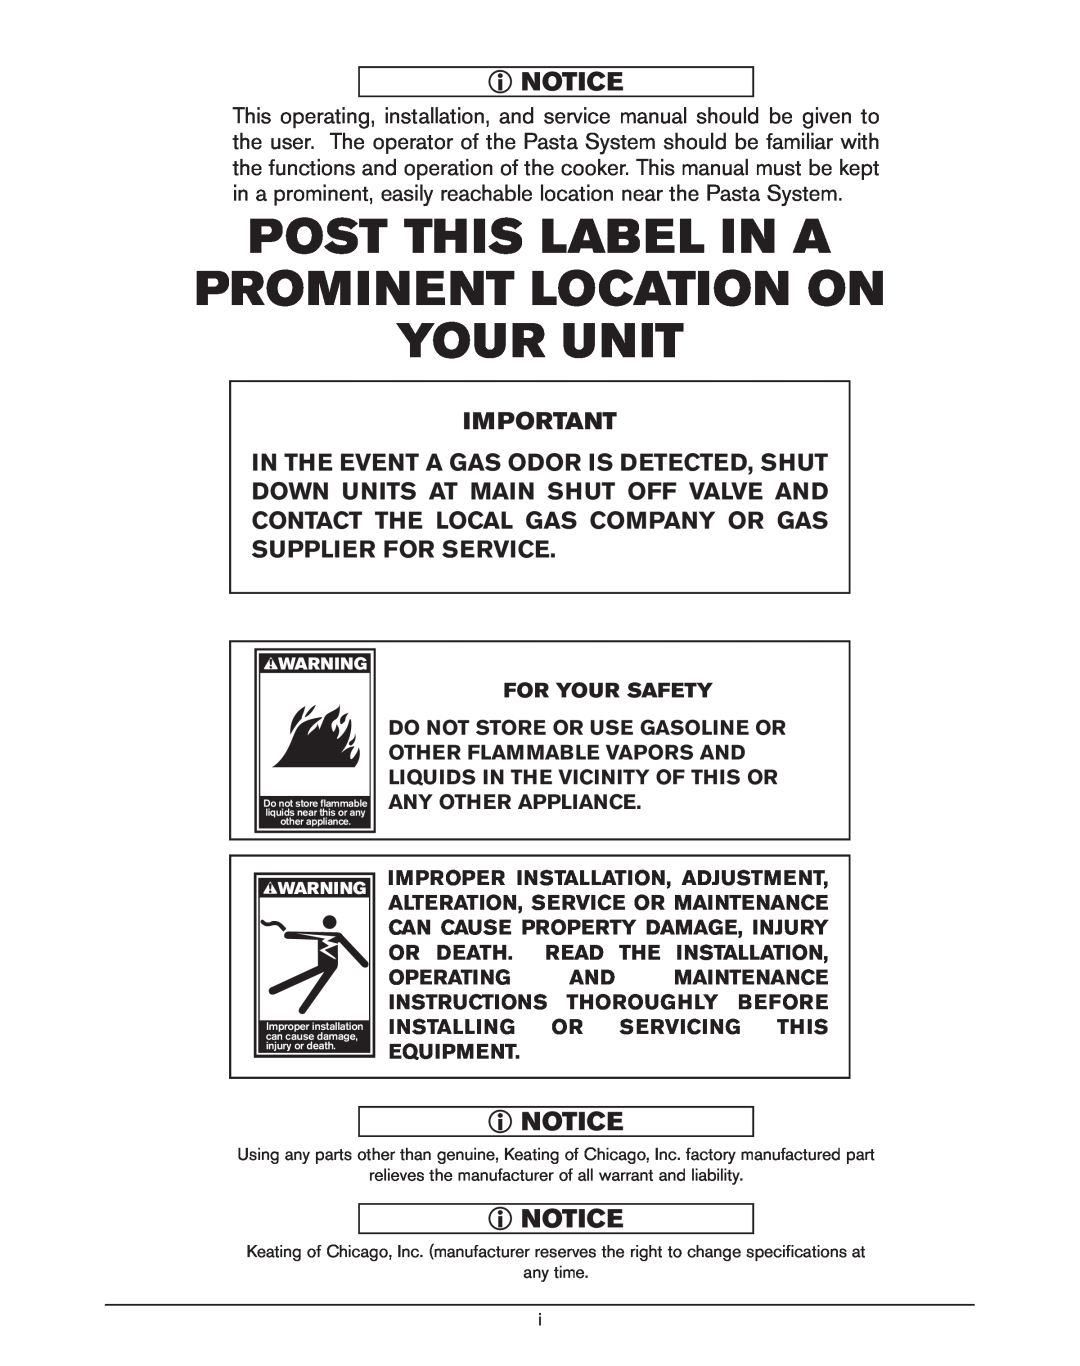 Keating Of Chicago Gas Custom Pasta System manual Post This Label In A Prominent Location On Your Unit 